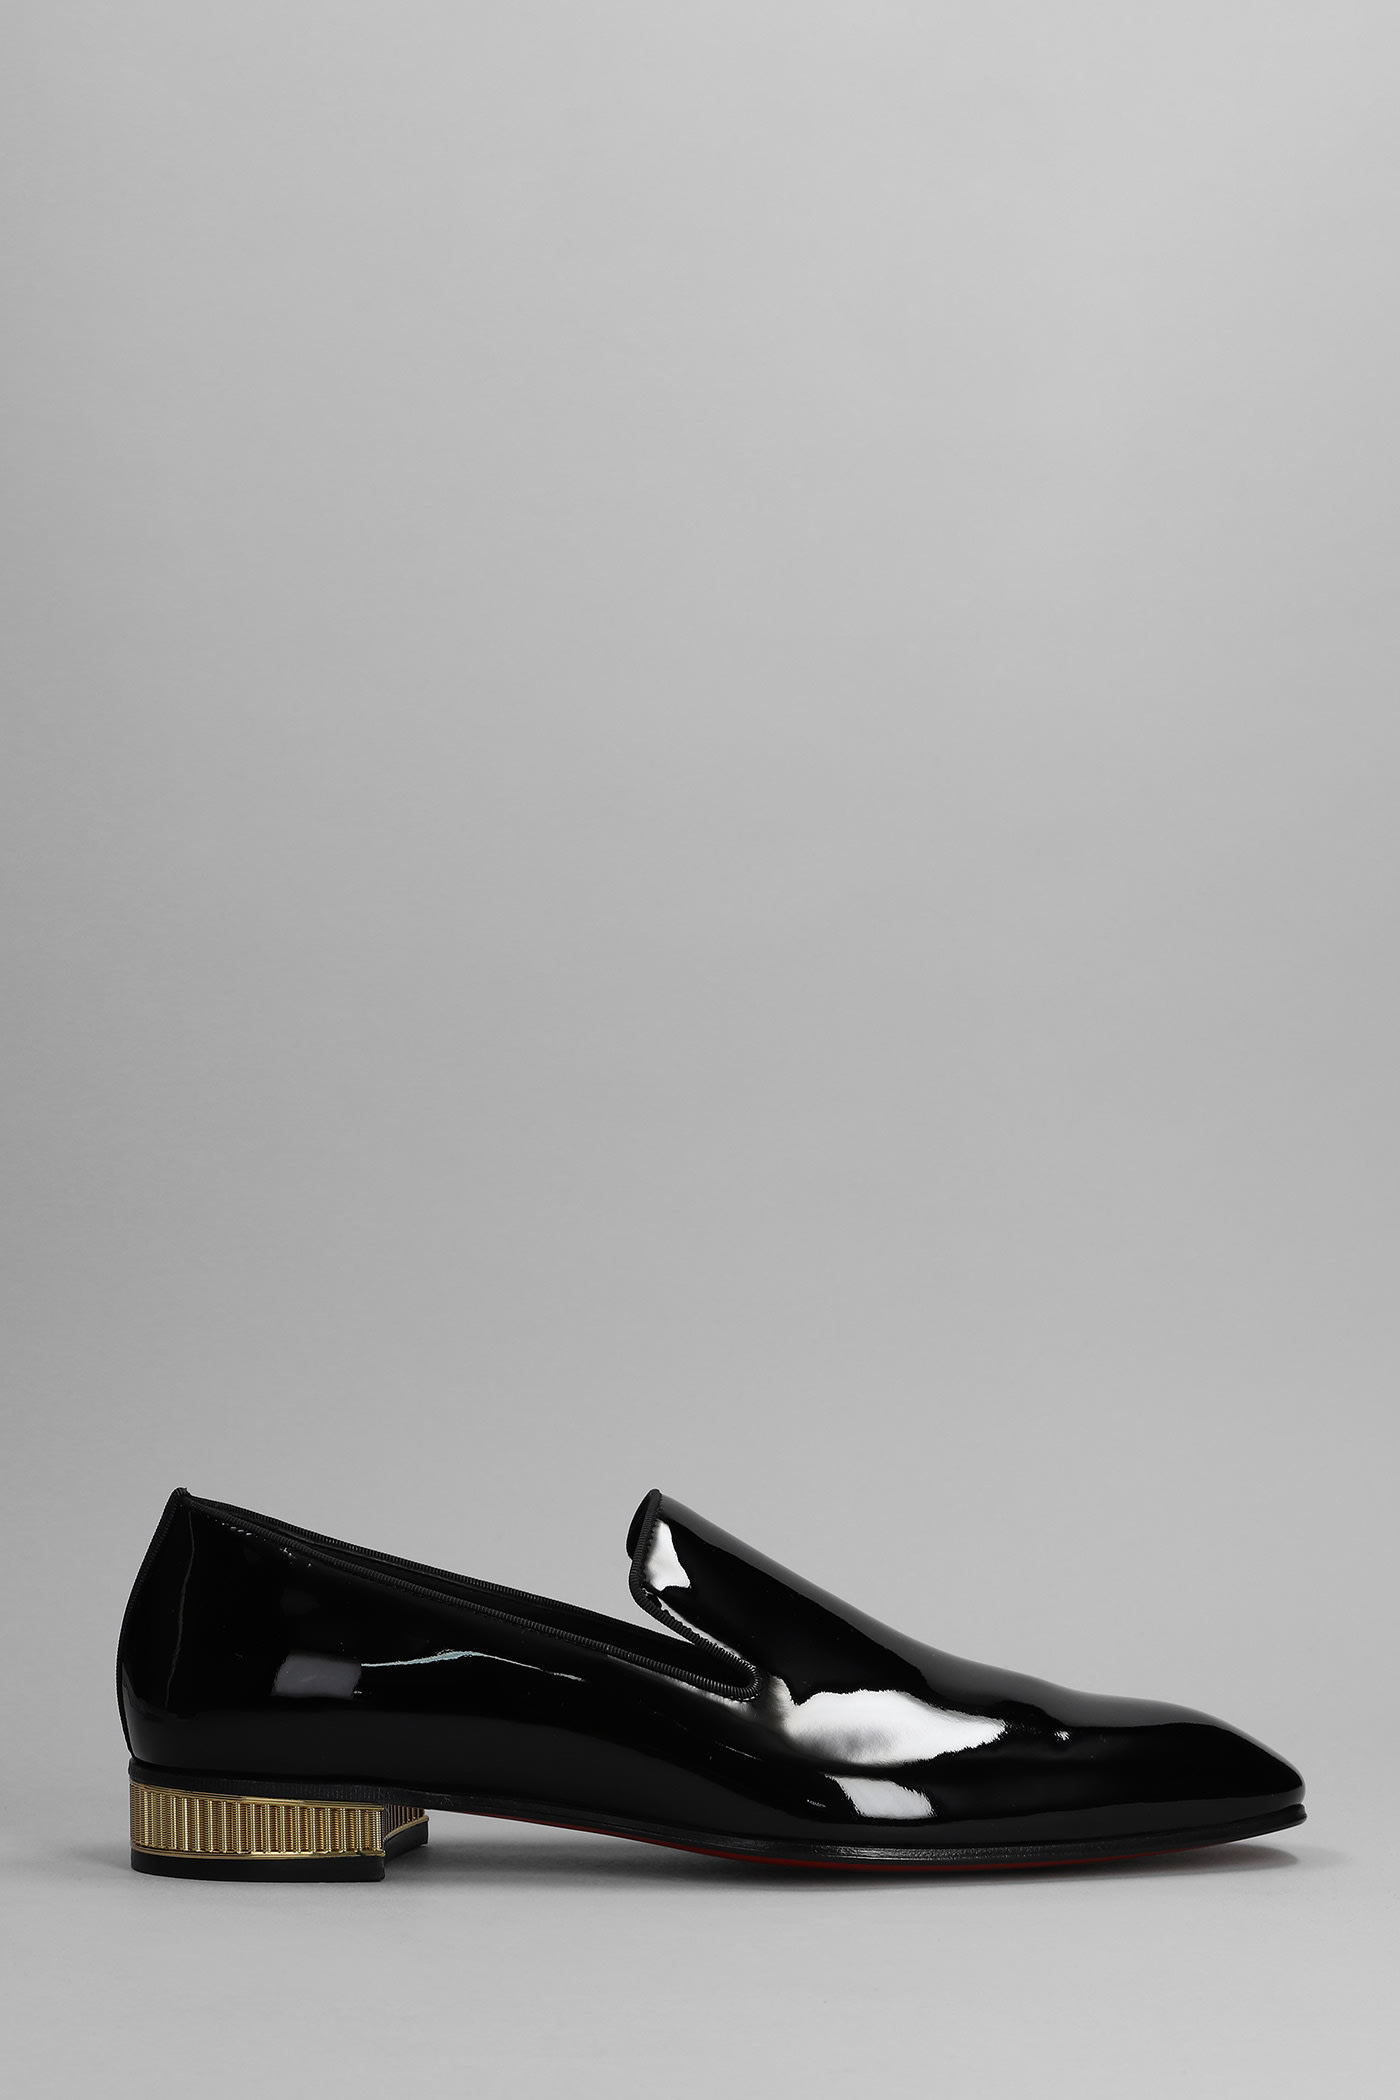 CHRISTIAN LOUBOUTIN COLONNAKI FLAT LOAFERS IN BLACK PATENT LEATHER